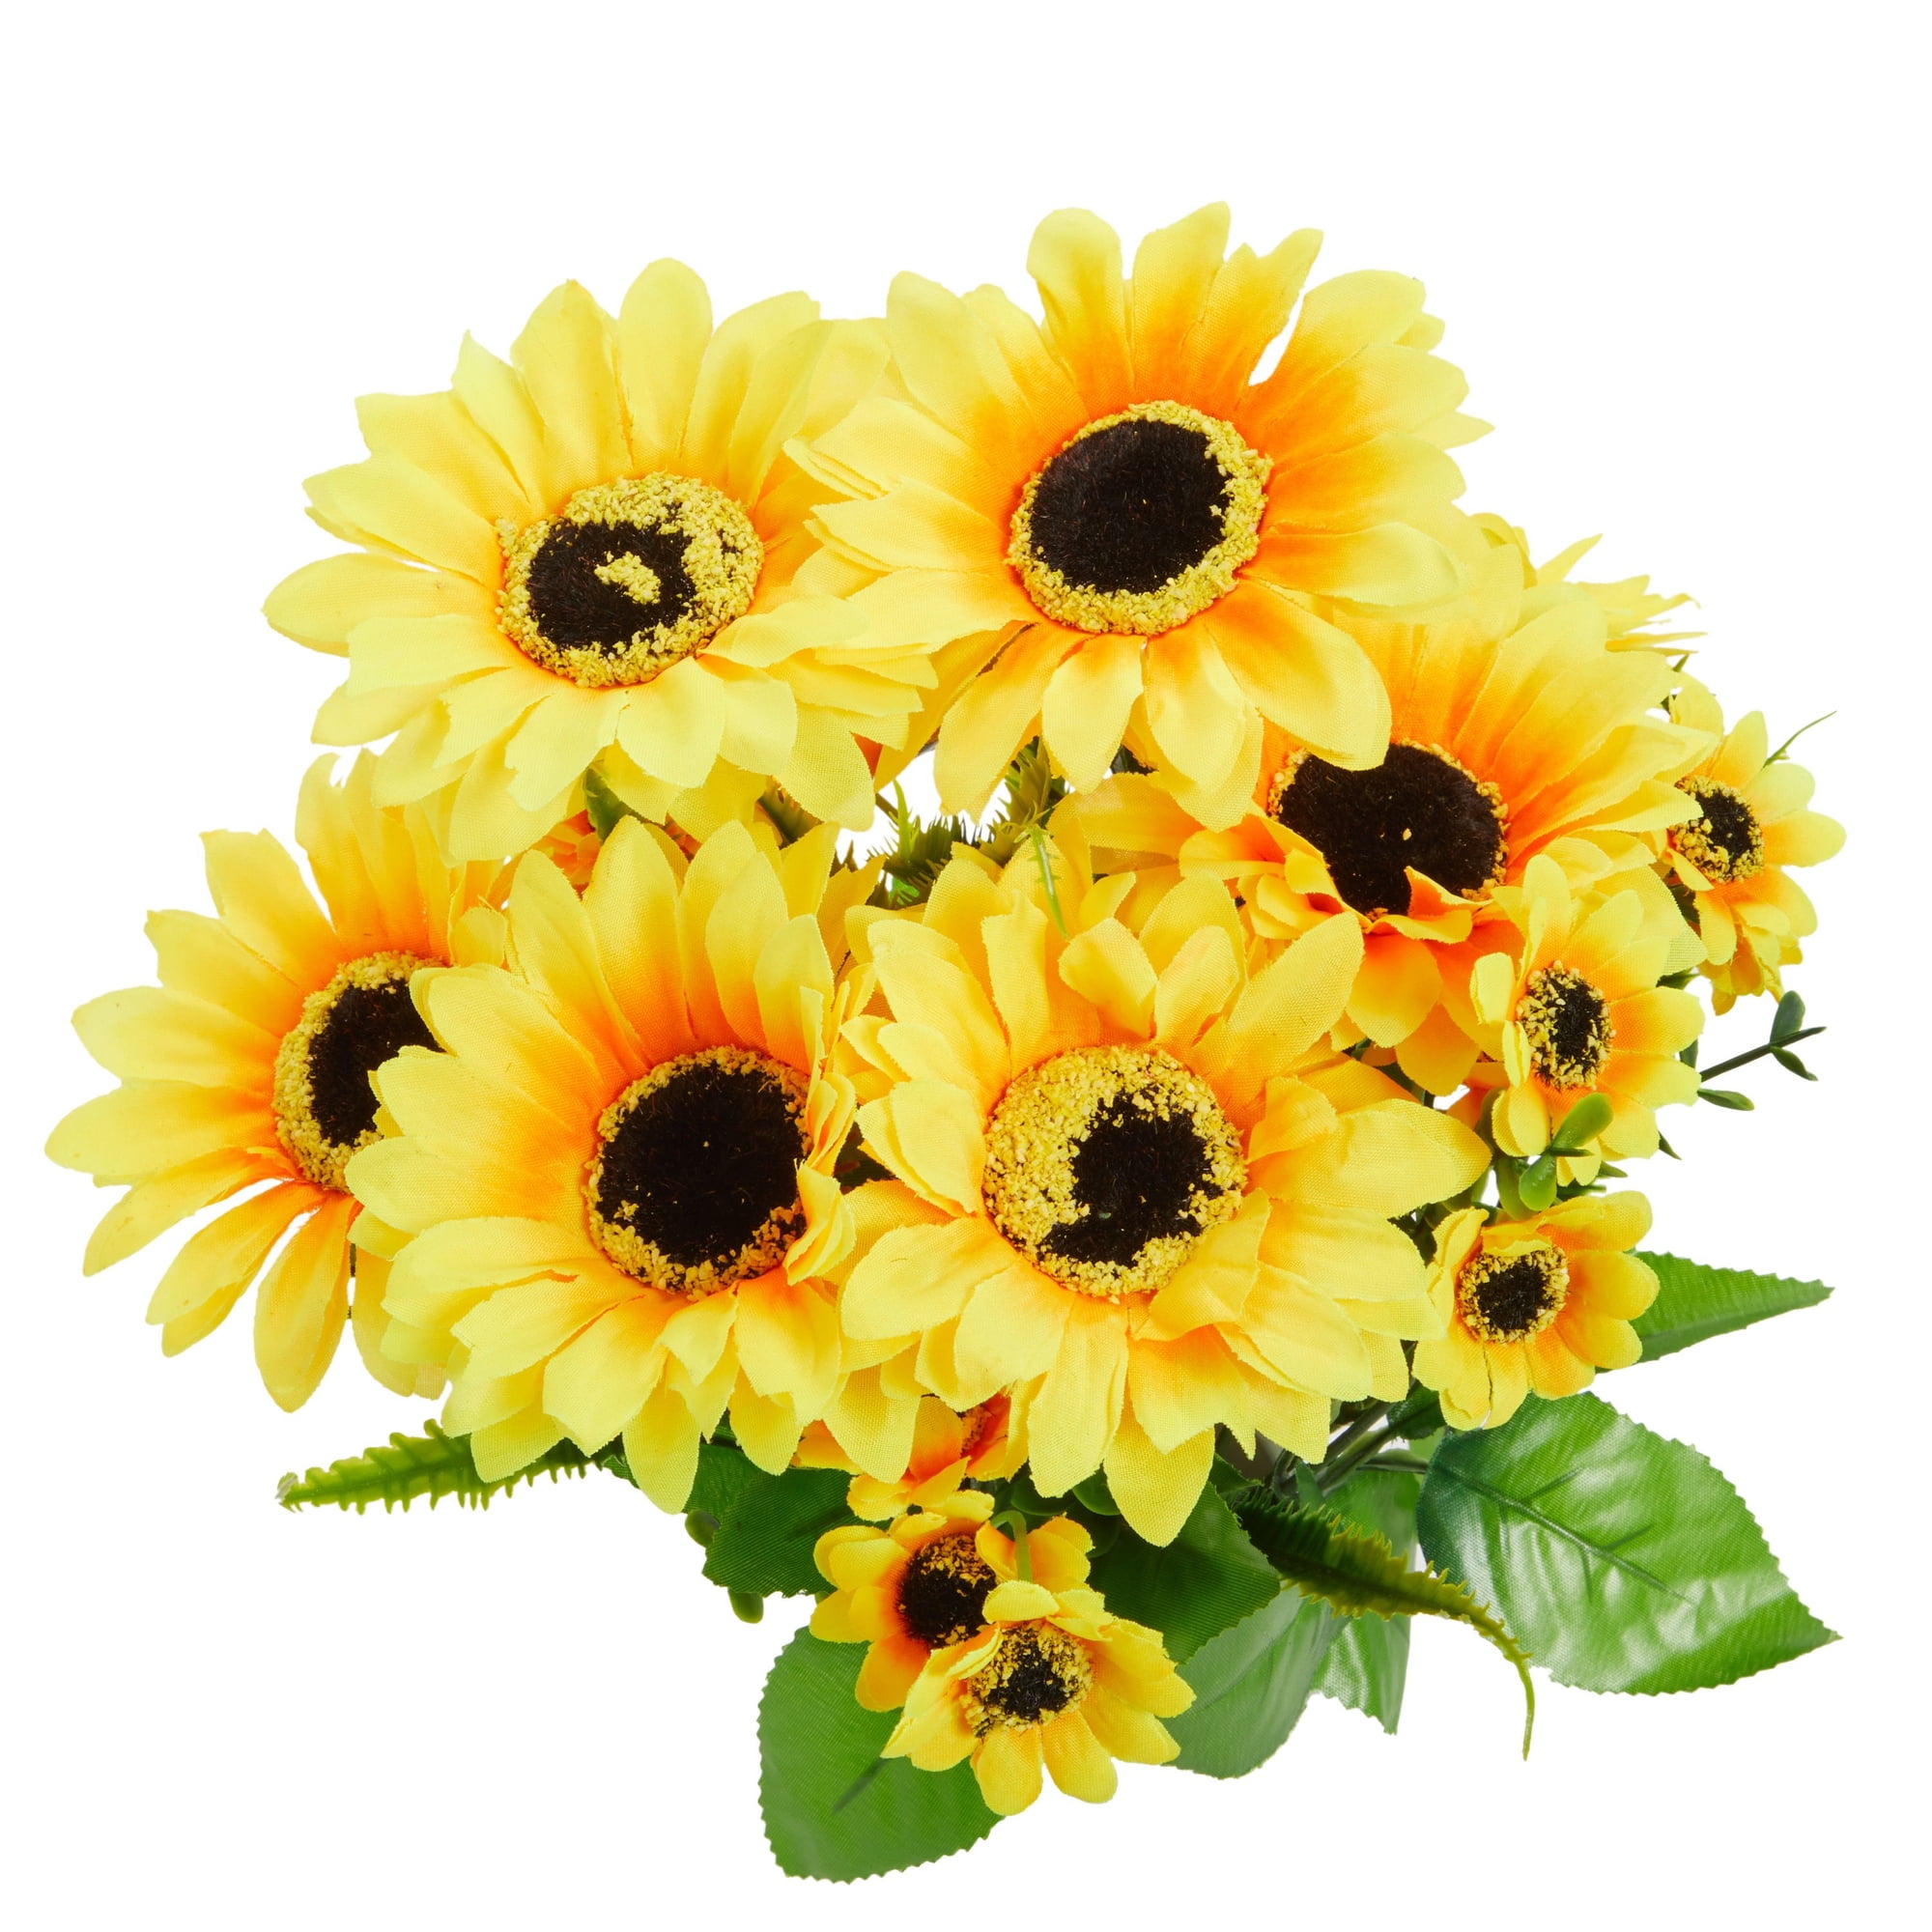 2 Artificial Sunflowers in Yellow - Fake Flowers Artificial Plant for Home  Décor - Bed Bath & Beyond - 29743722